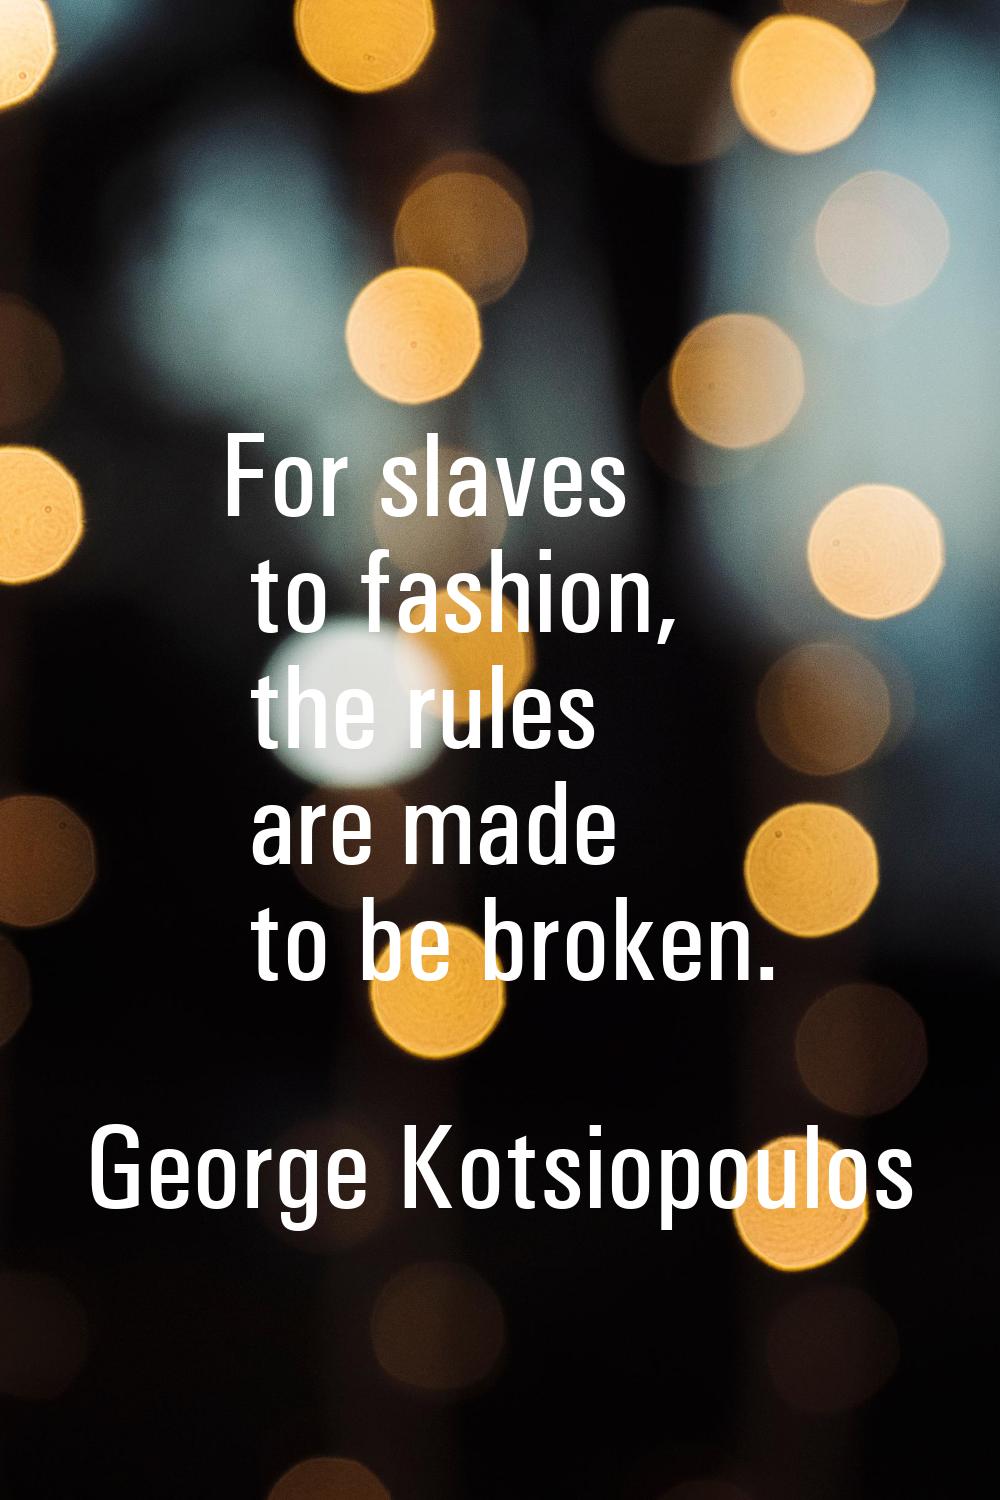 For slaves to fashion, the rules are made to be broken.